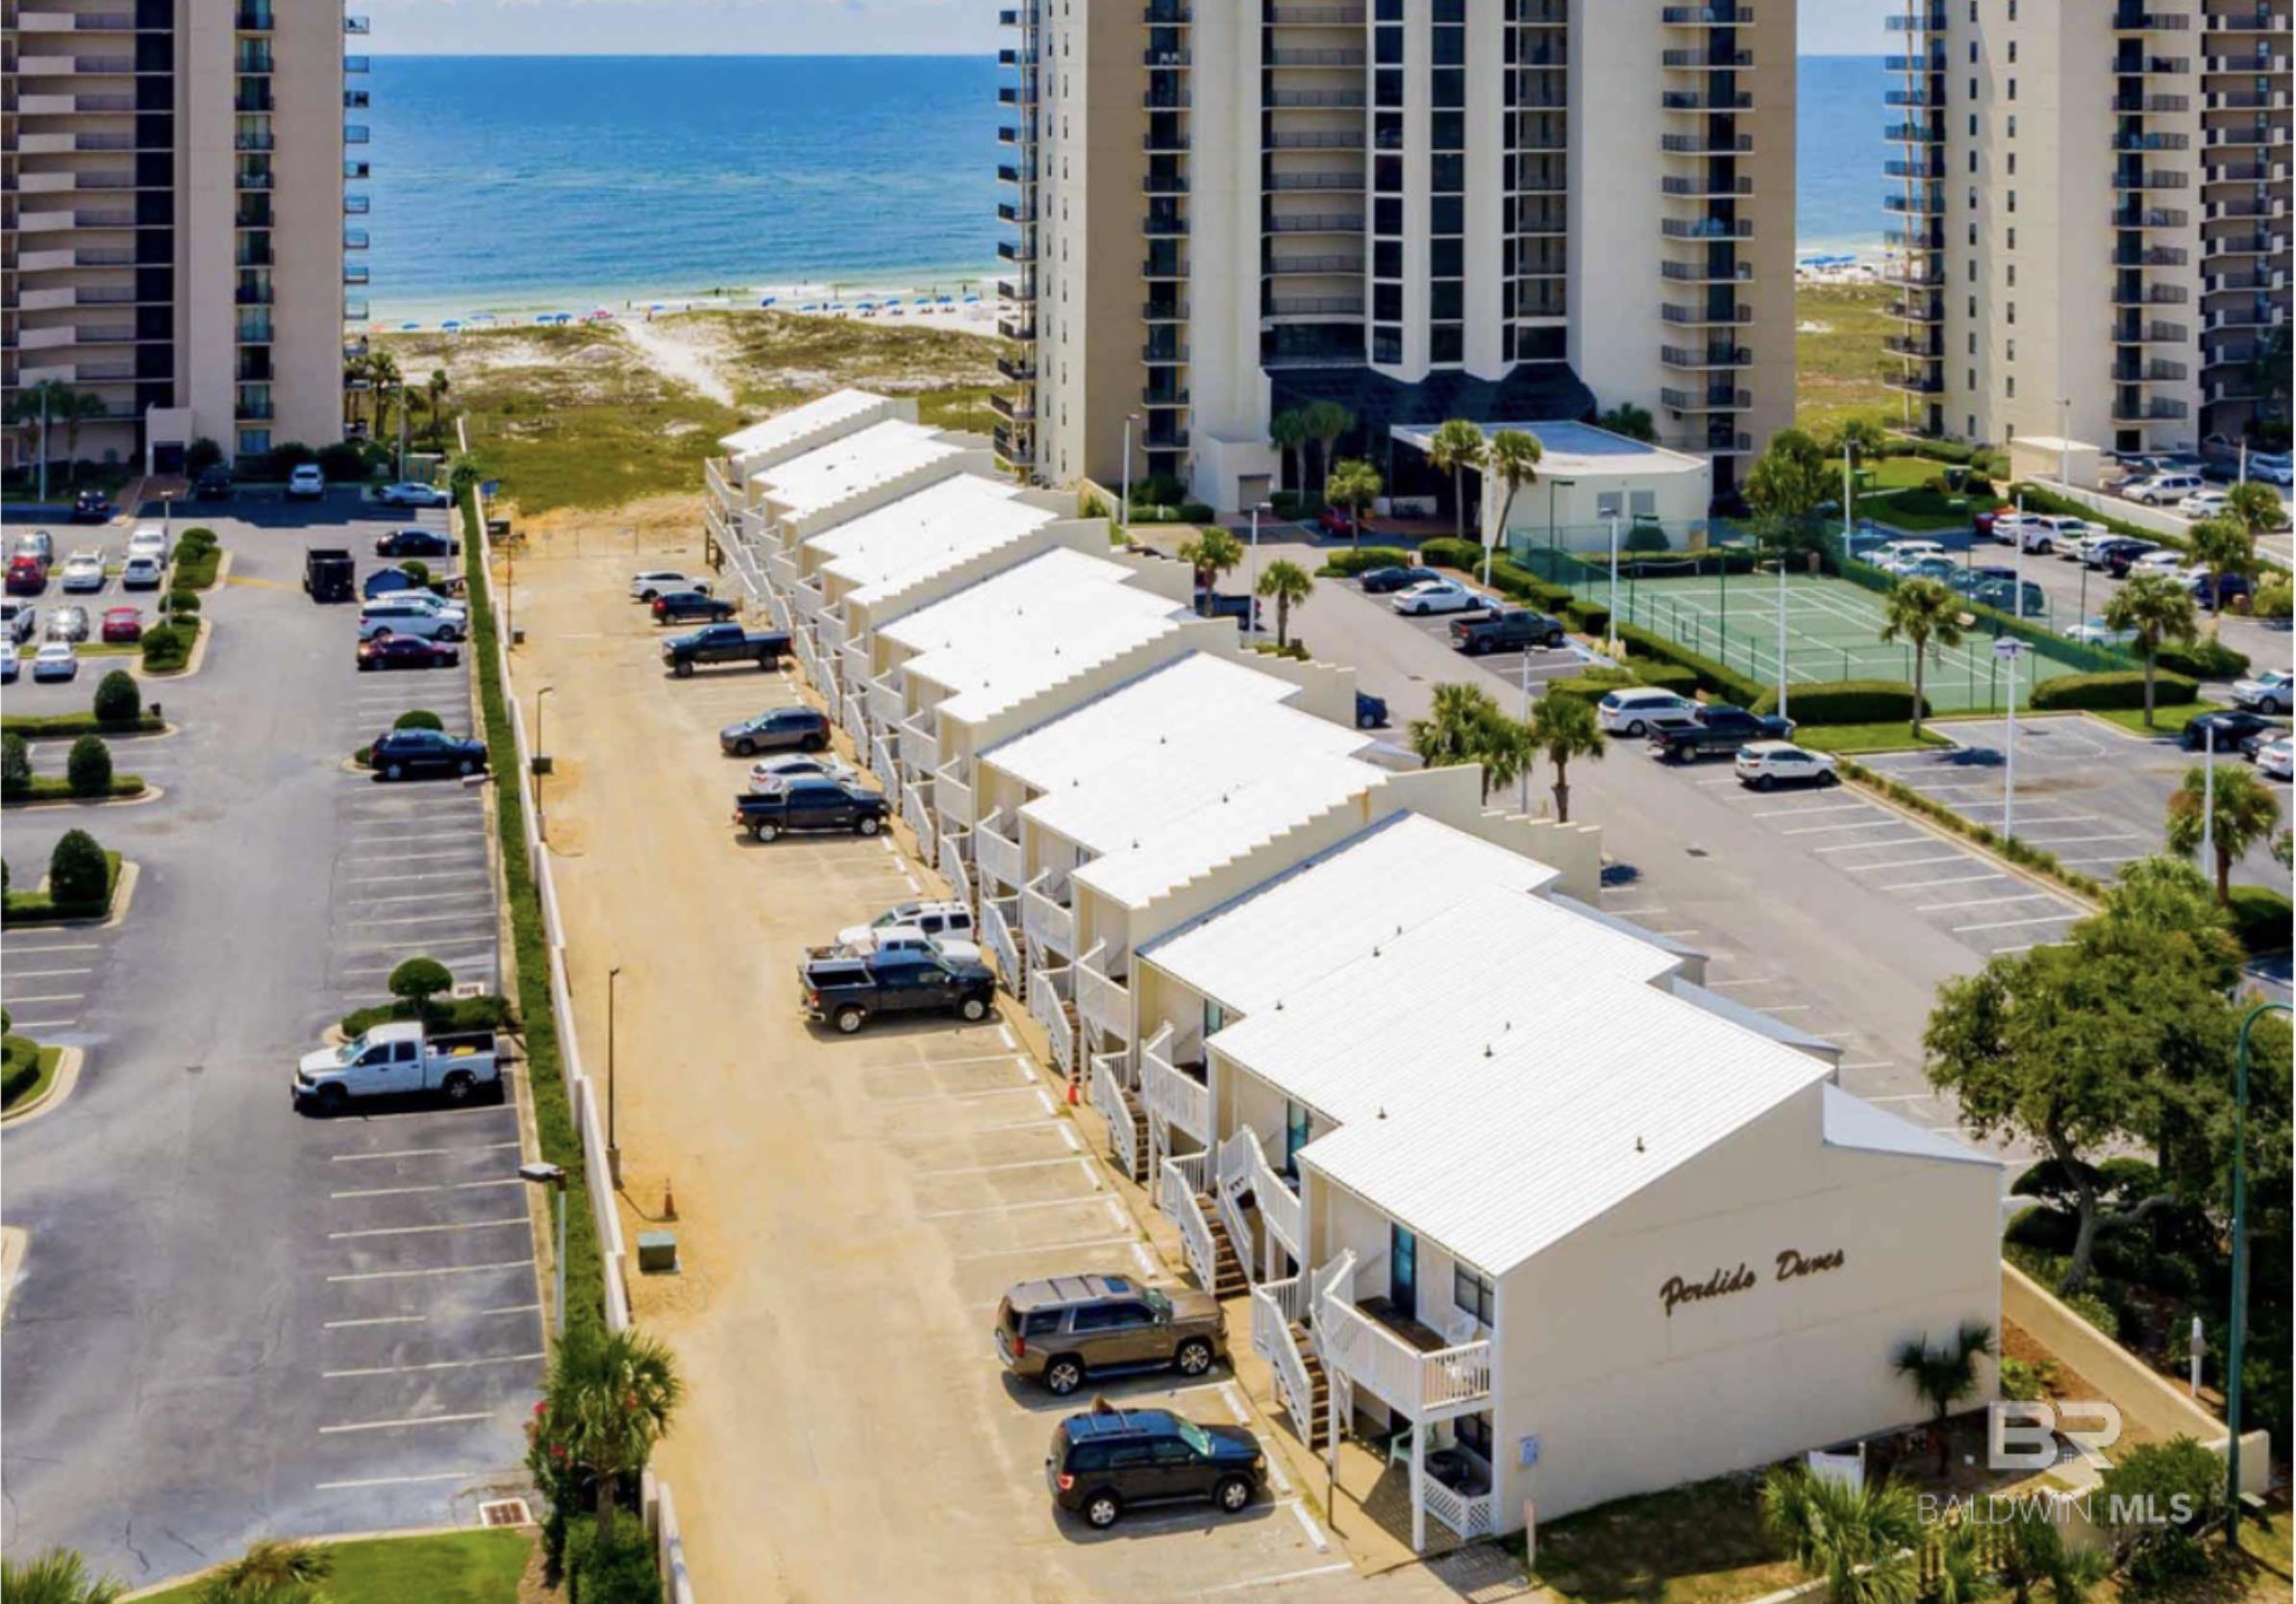 This wonderful MAIN LEVEL condo has been beautifully renovated. You will fall in love with the upscale finishes throughout! Situated on the Gulf side of the Blvd. you are just steps from the Gulf of Mexico, Perdido pass, as well as your favorite shops and restaurants.